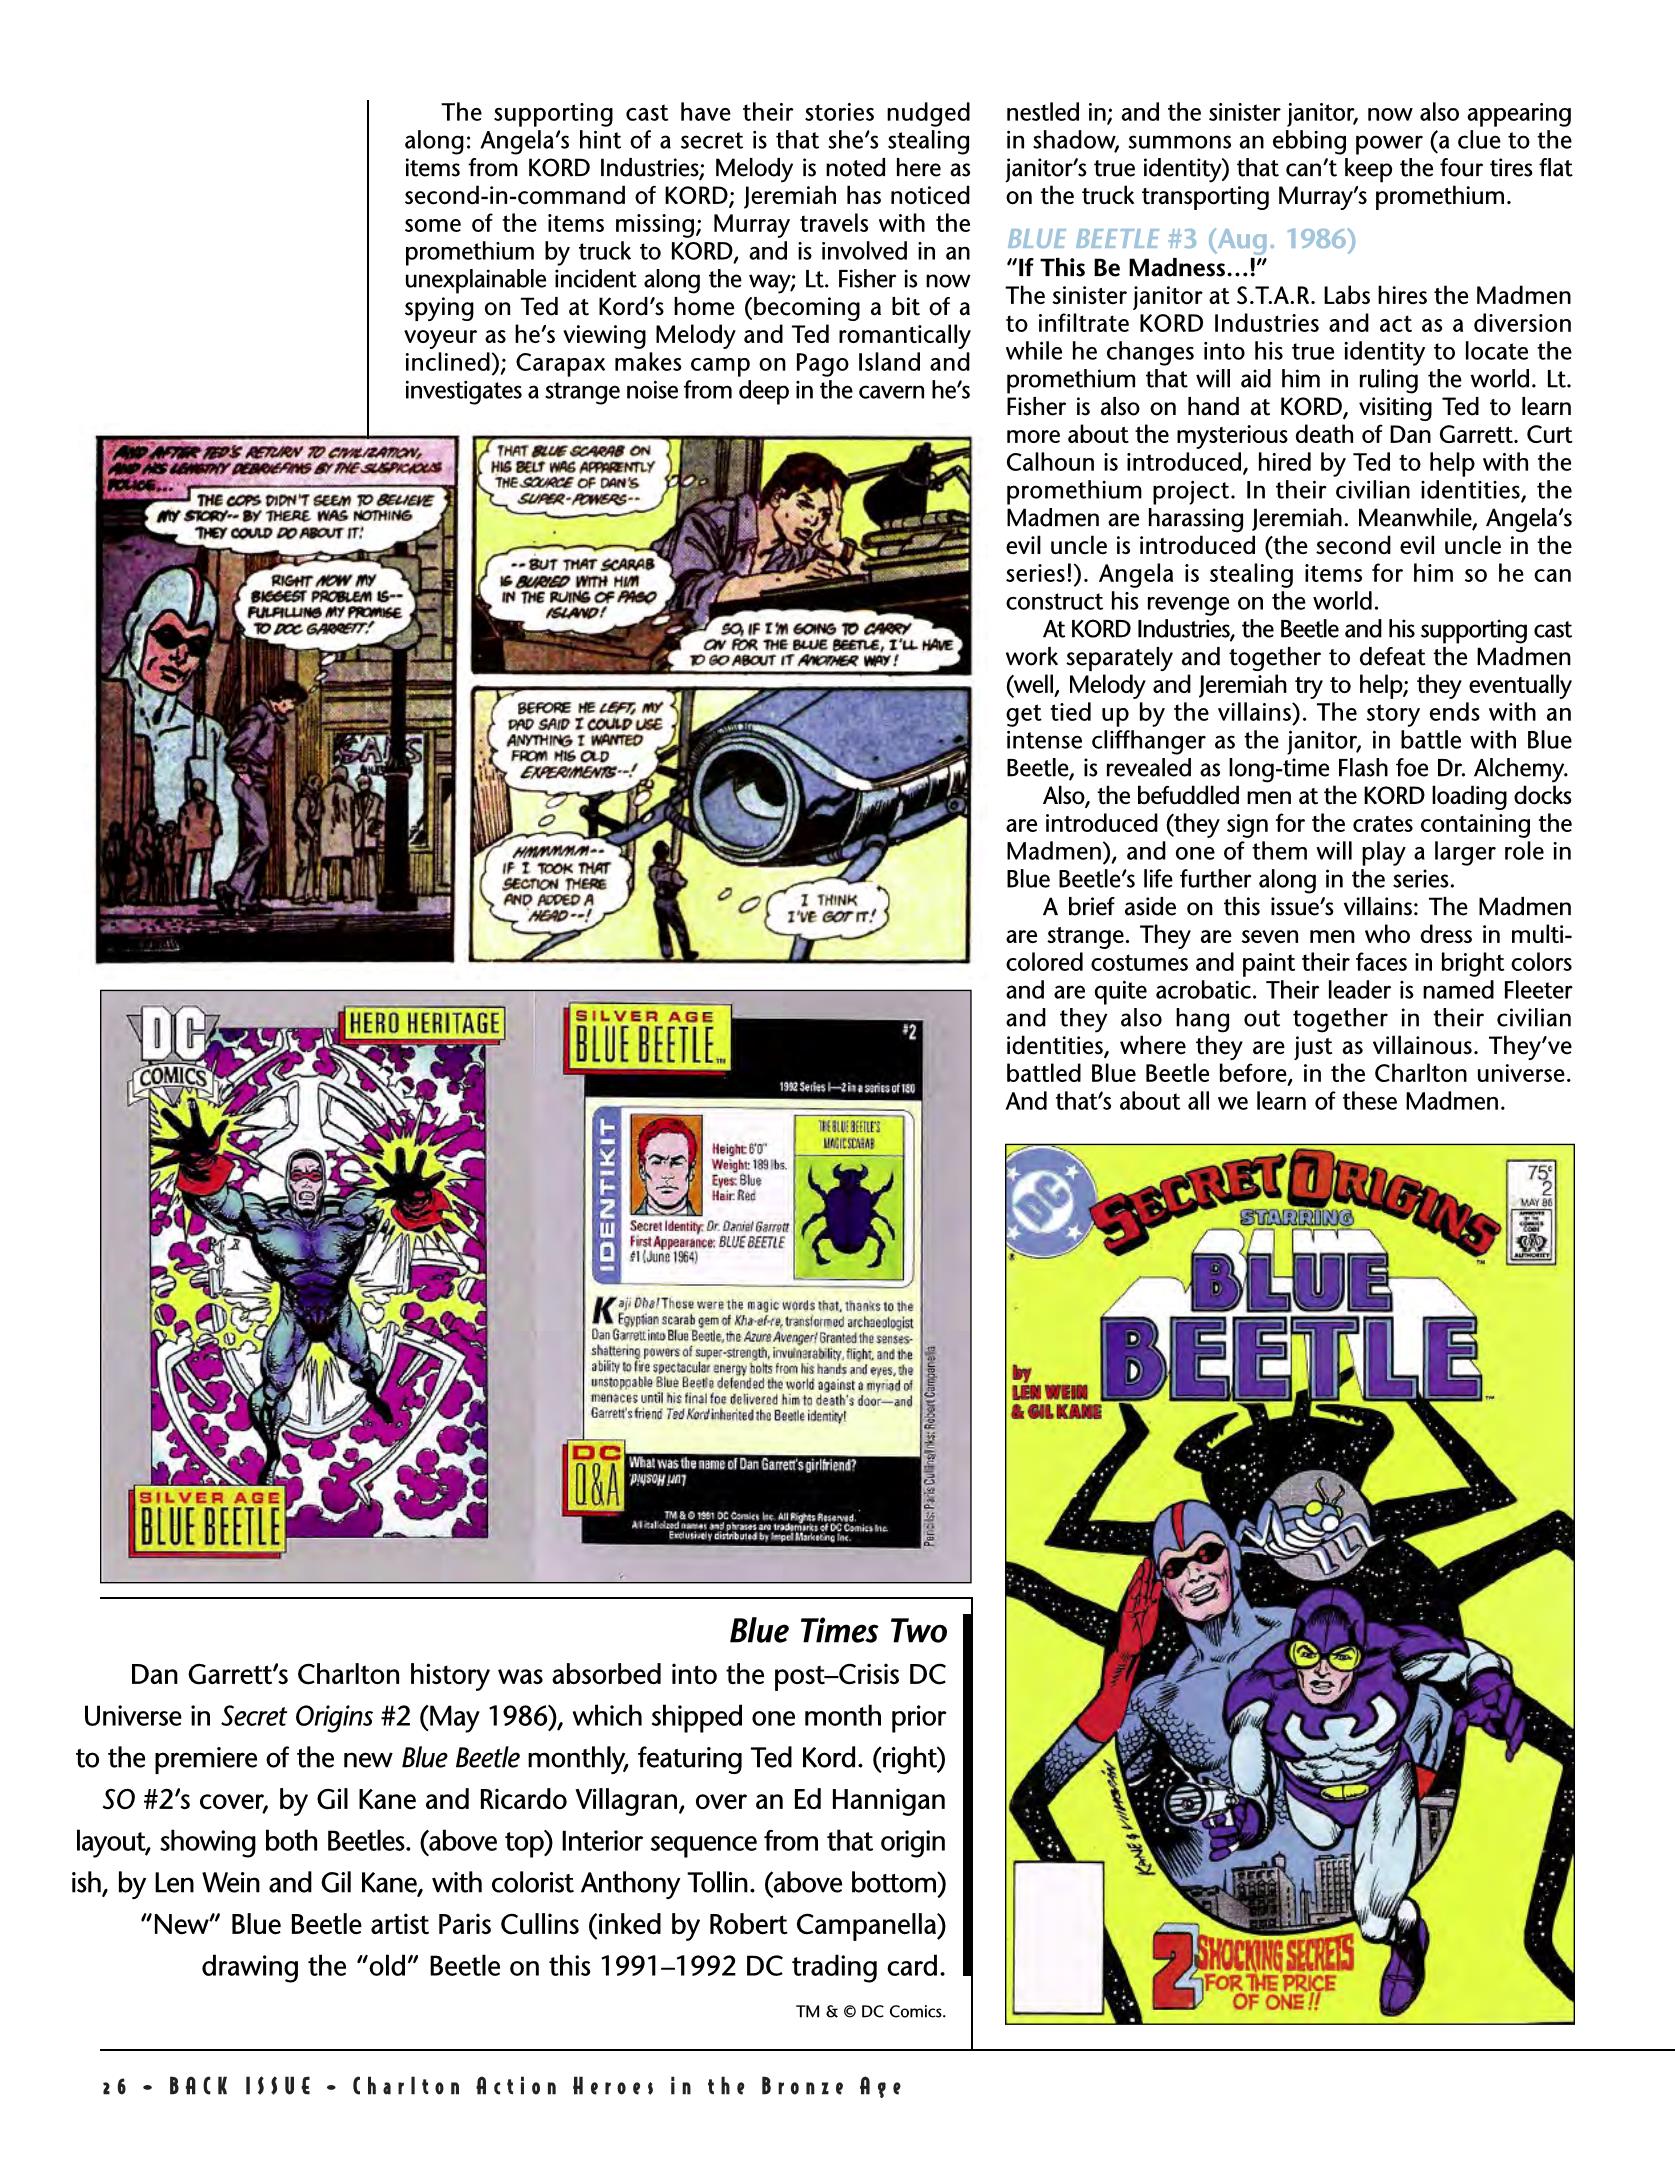 Read online Back Issue comic -  Issue #79 - 28